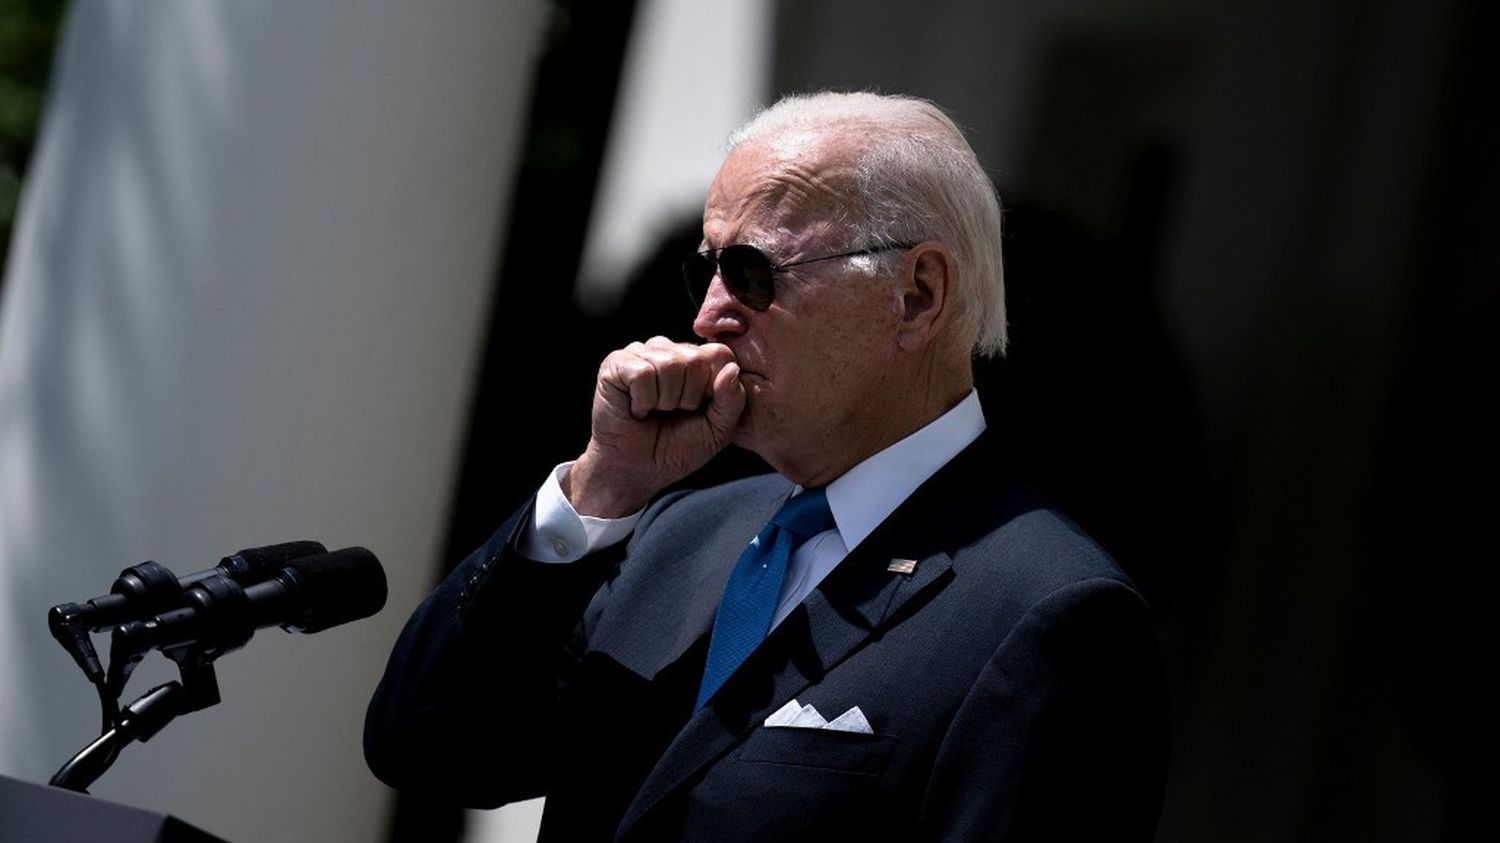 United States: Joe Biden, again tested positive for Covid-19, reconfines himself
